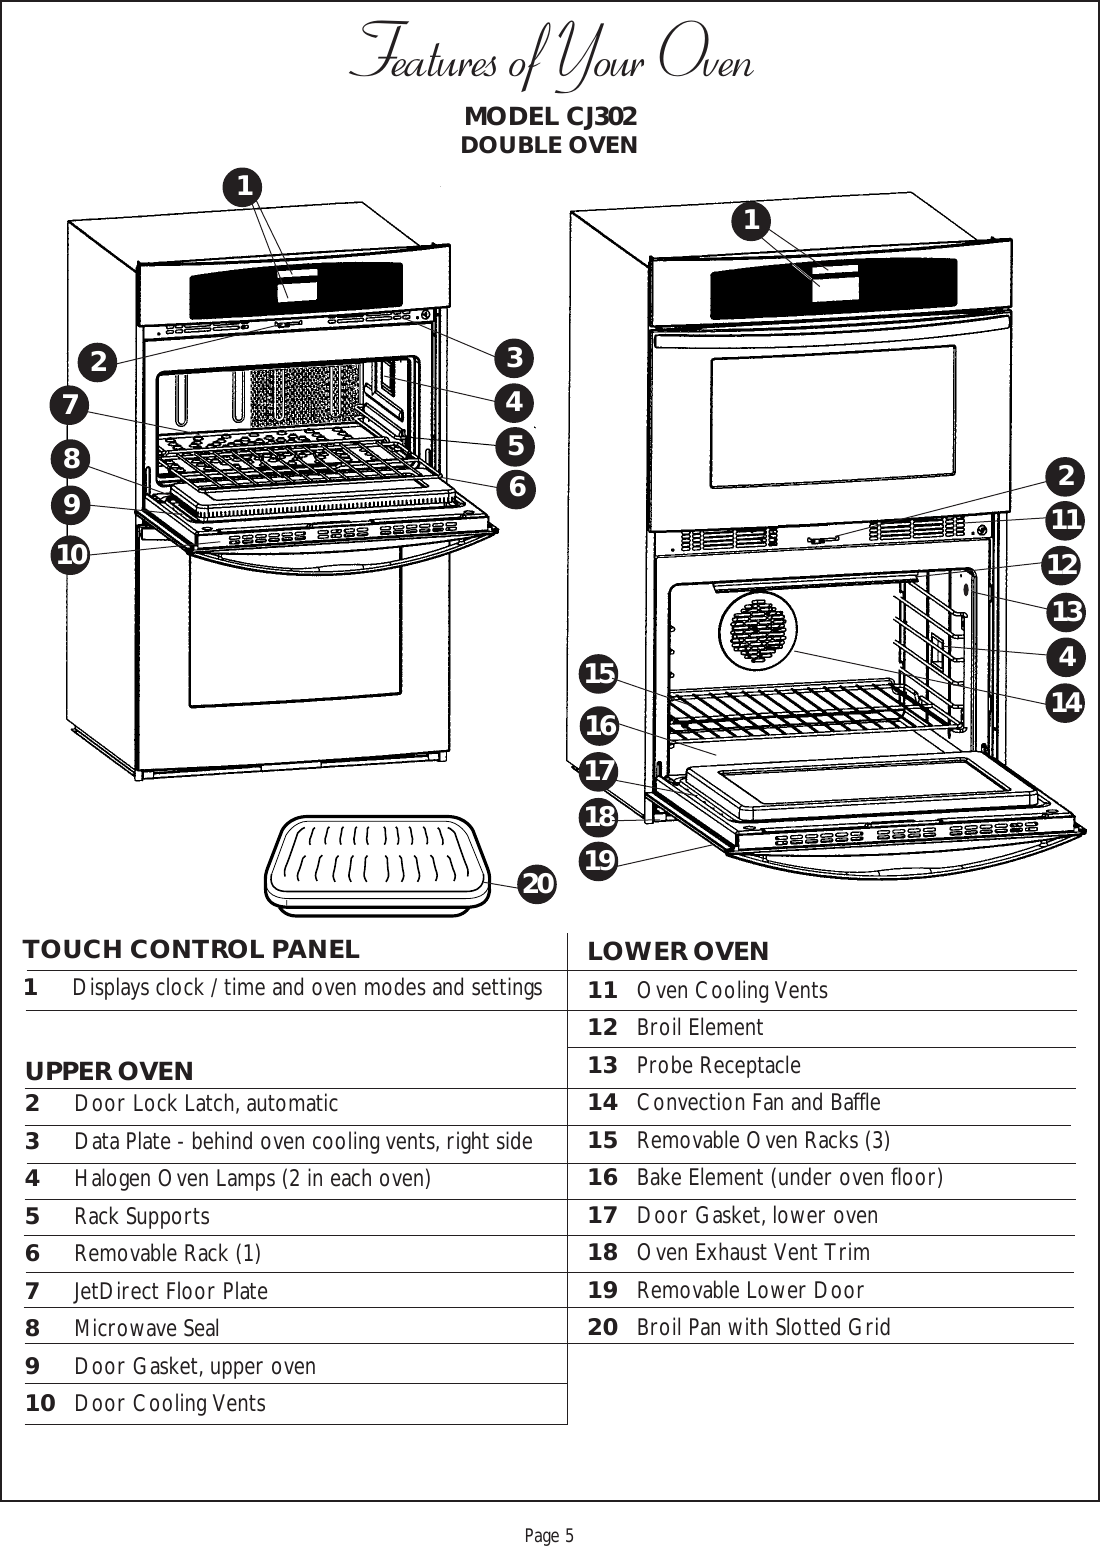 Proof 9-21-99Page 5MODEL CJ302DOUBLE OVENFeatures of Your OvenTOUCH CONTROL PANEL1Displays clock / time and oven modes and settings LOWER OVEN11 Oven Cooling Vents12 Broil Element13 Probe Receptacle14 Convection Fan and Baffle15 Removable Oven Racks (3)16 Bake Element (under oven floor)17 Door Gasket, lower oven18 Oven Exhaust Vent Trim19 Removable Lower Door20 Broil Pan with Slotted Grid1234567891020UPPER OVEN2Door Lock Latch, automatic3Data Plate - behind oven cooling vents, right side4Halogen Oven Lamps (2 in each oven)5Rack Supports6Removable Rack (1)7JetDirect Floor Plate8Microwave Seal9Door Gasket, upper oven10 Door Cooling Vents12121341415191618191711